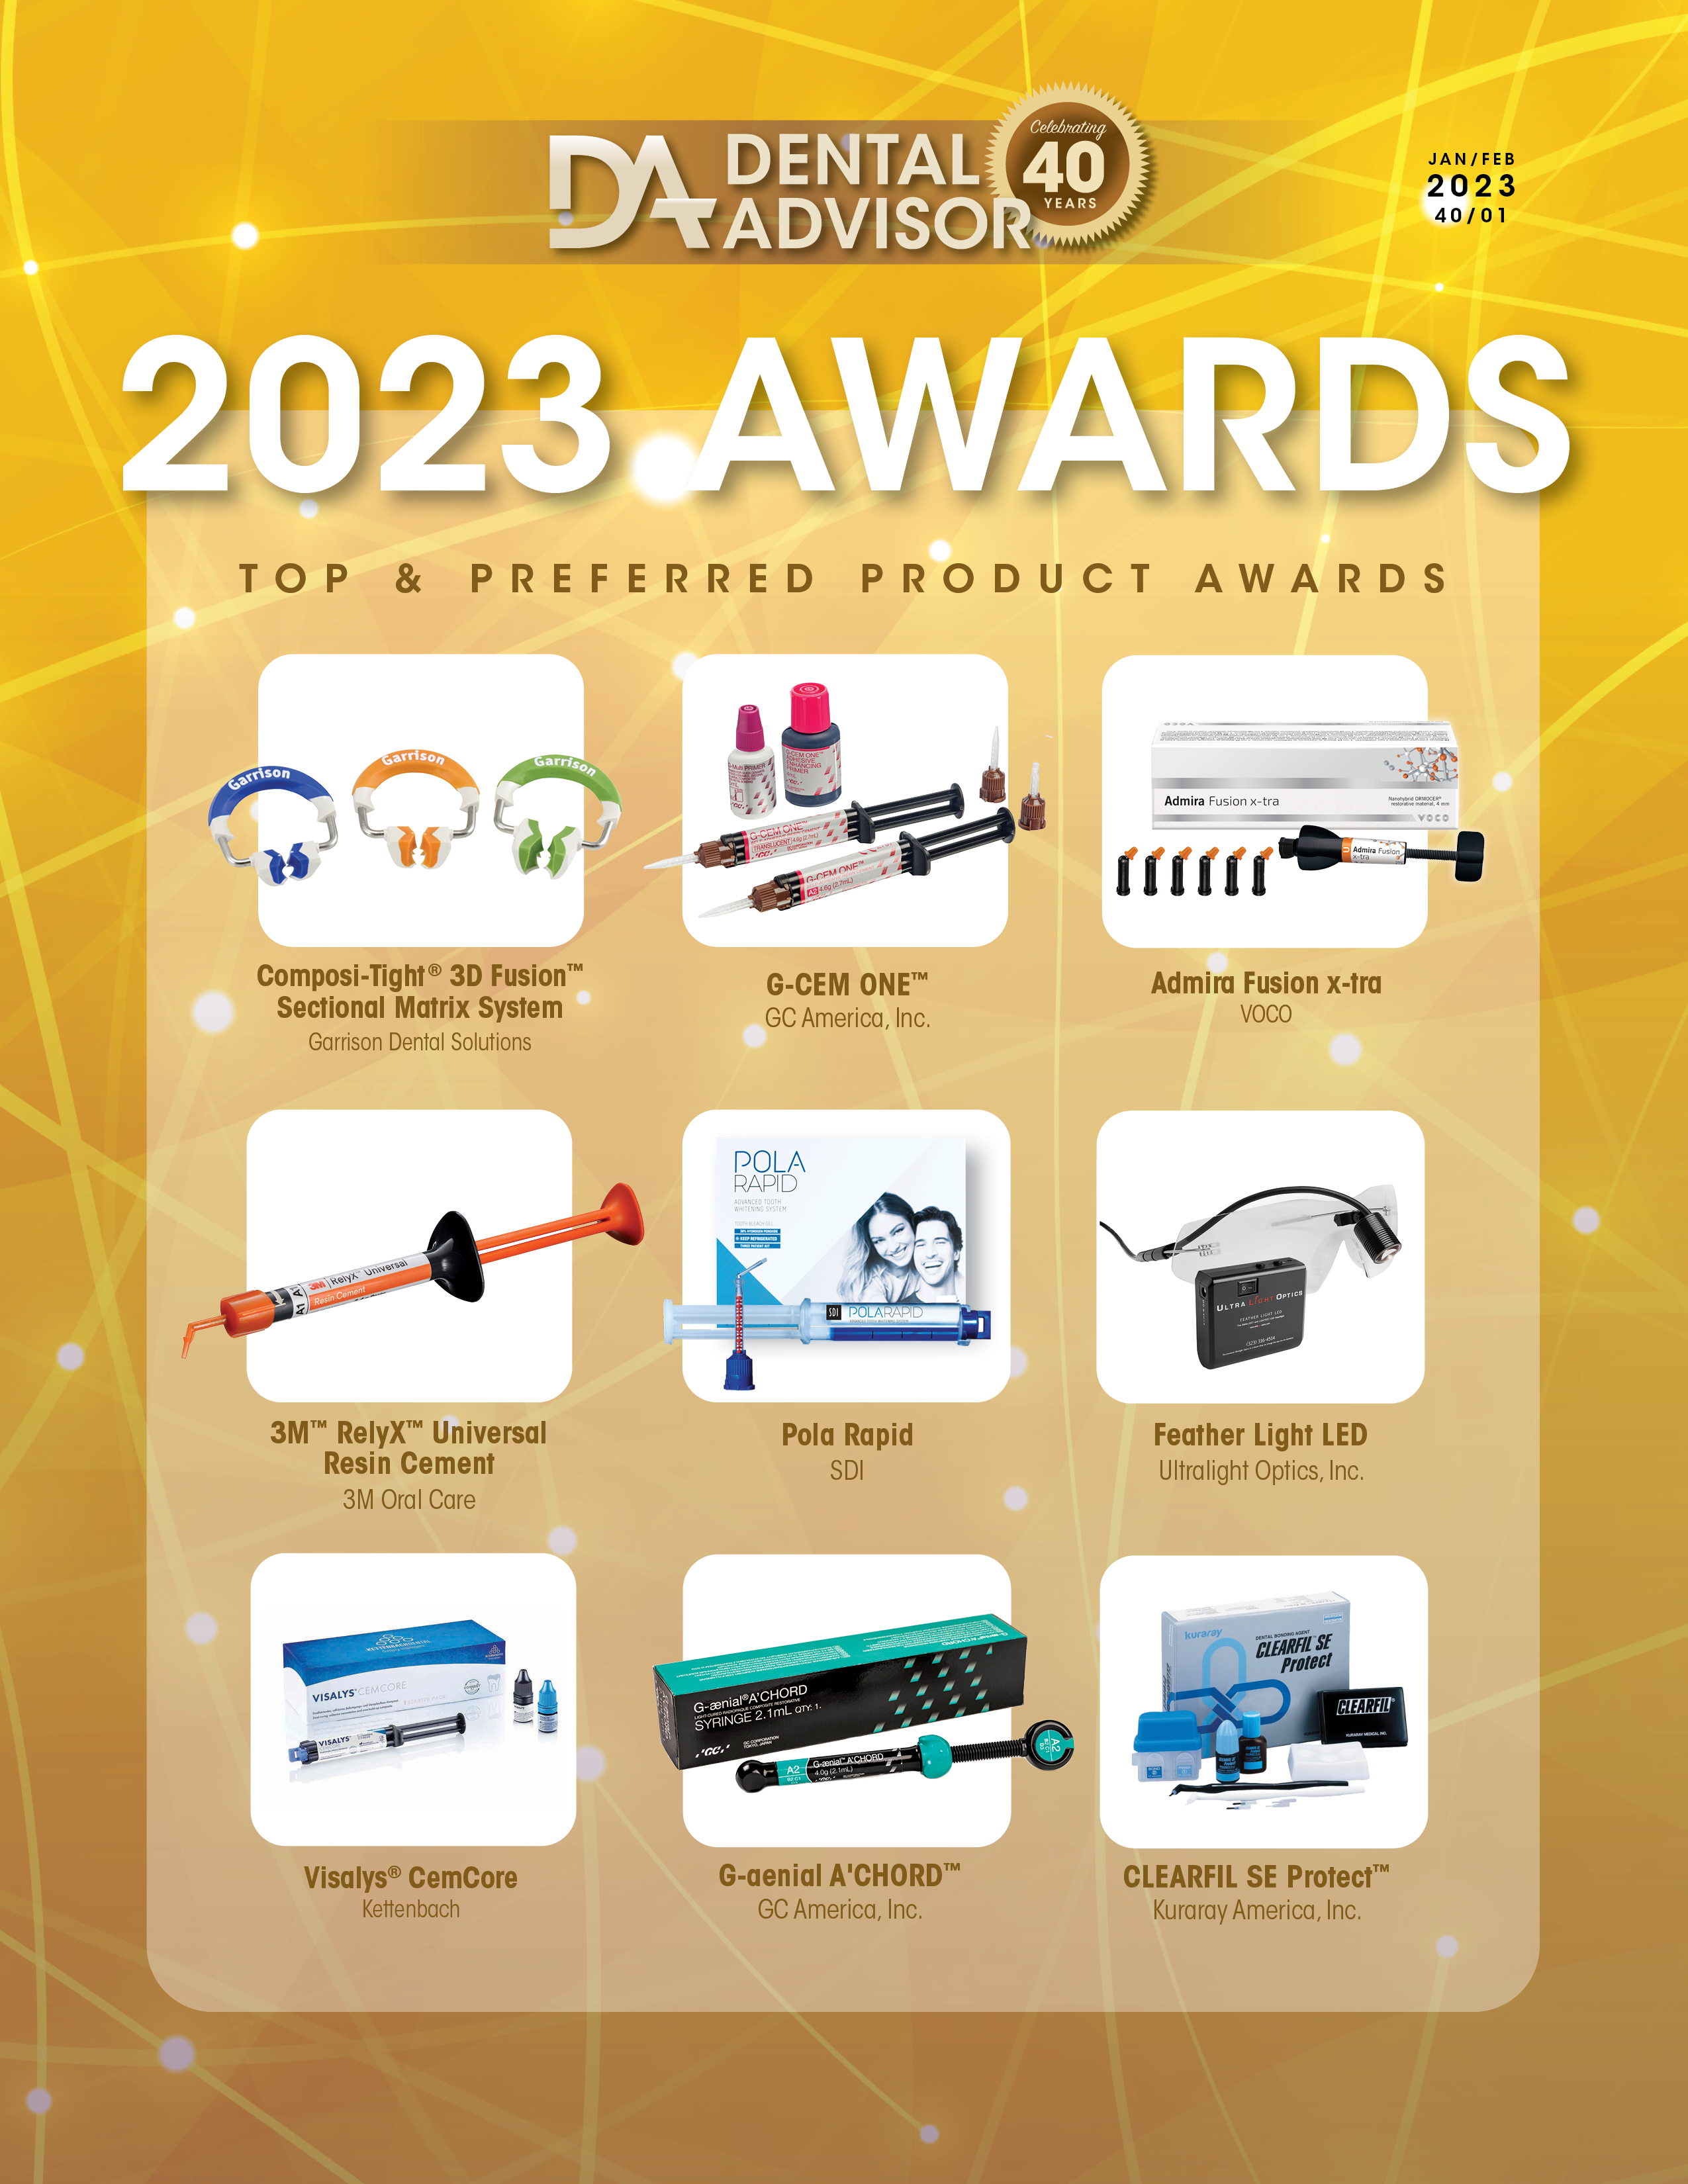 2023 Top Awards & Preferred Products